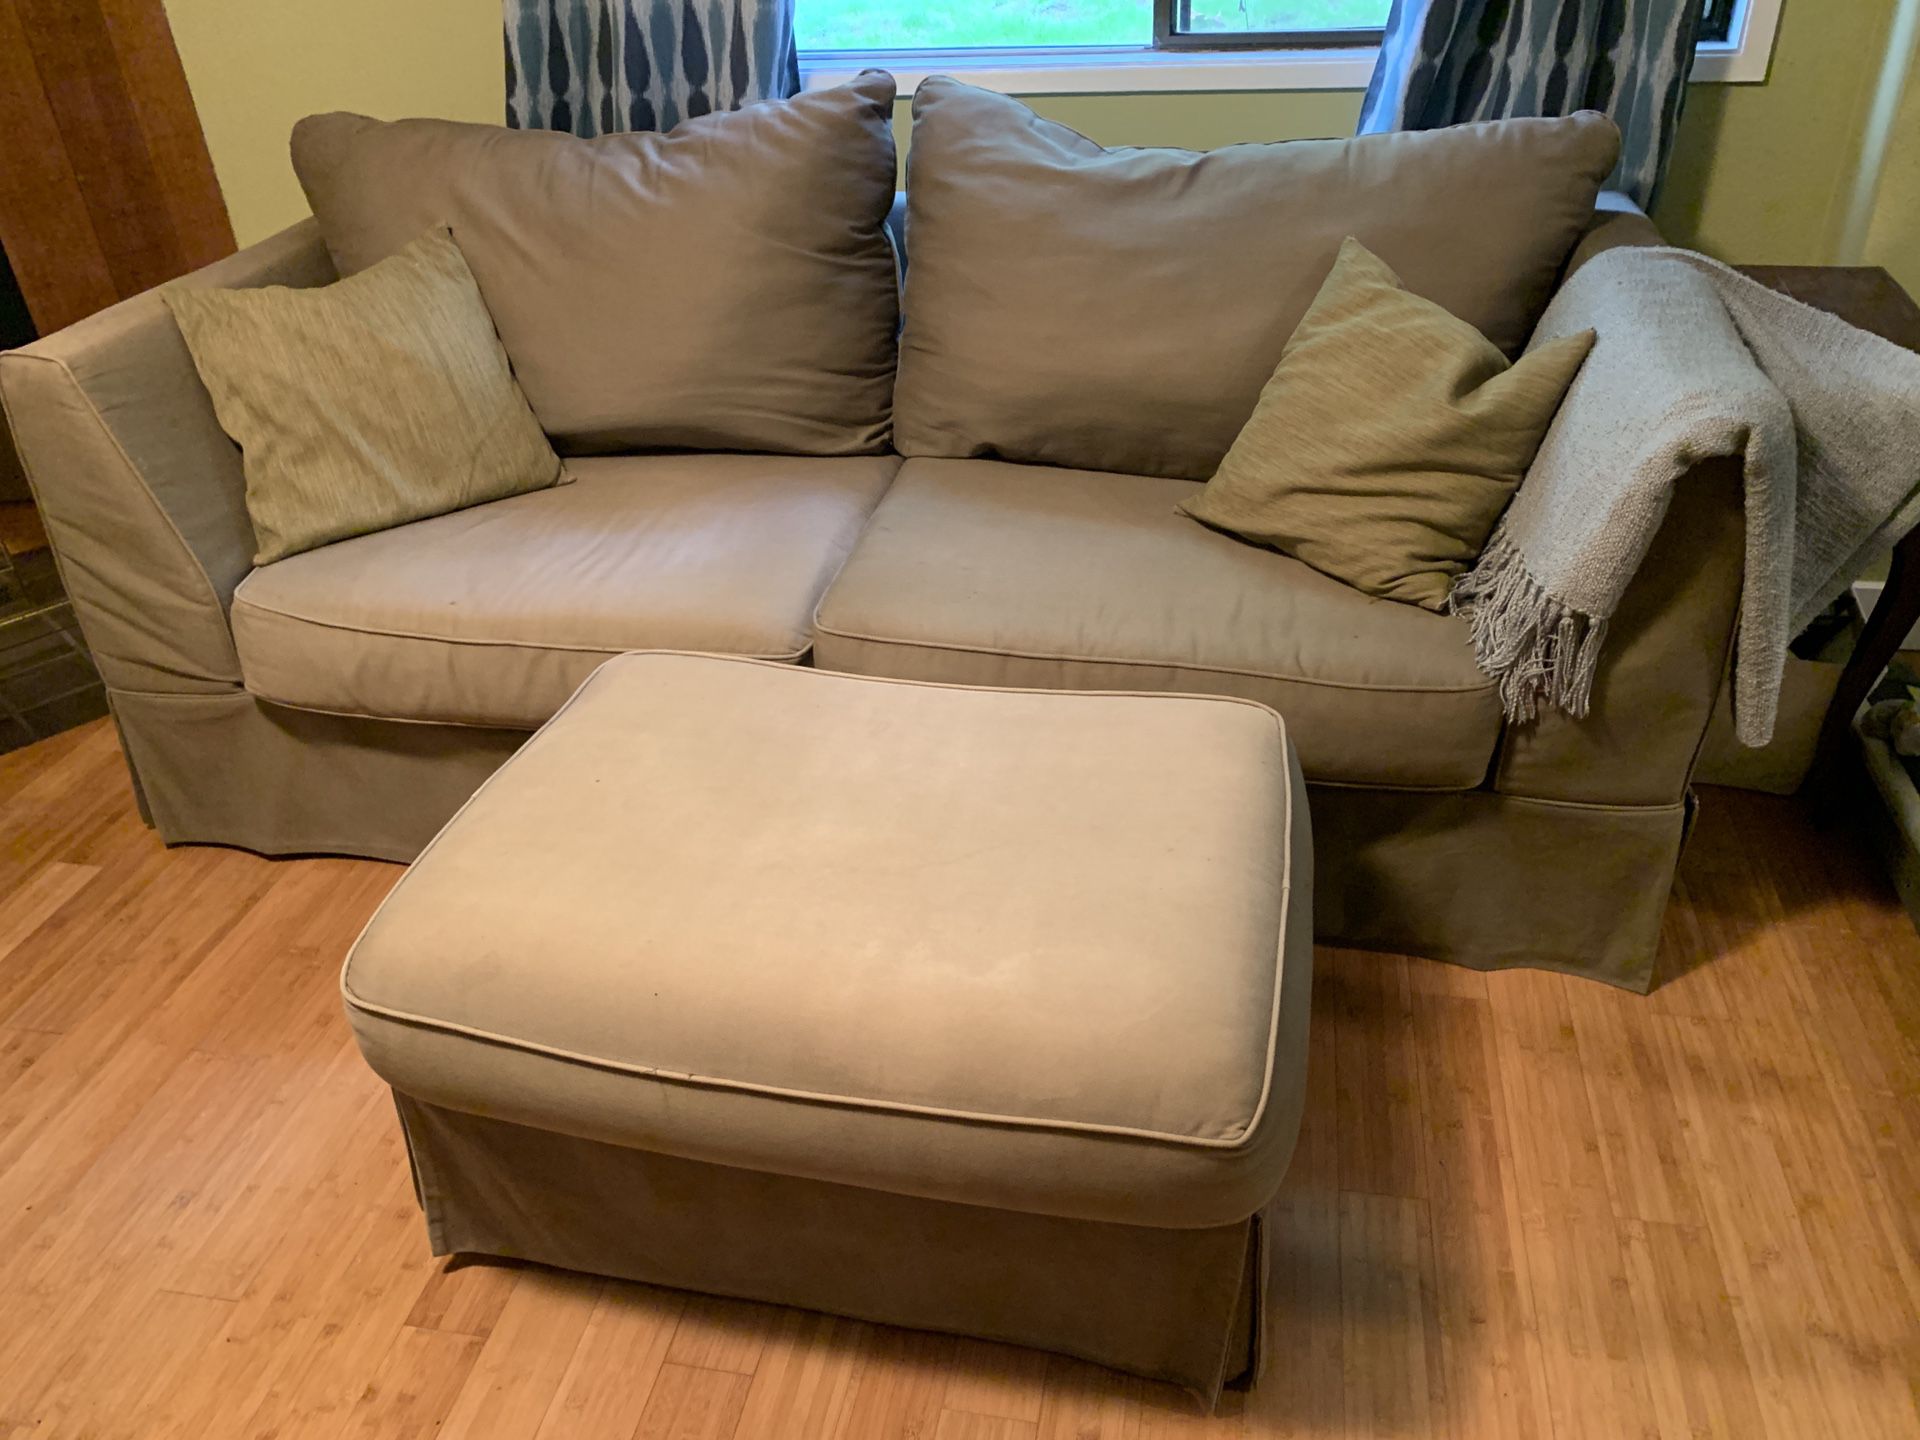 Free tan couch and ottoman